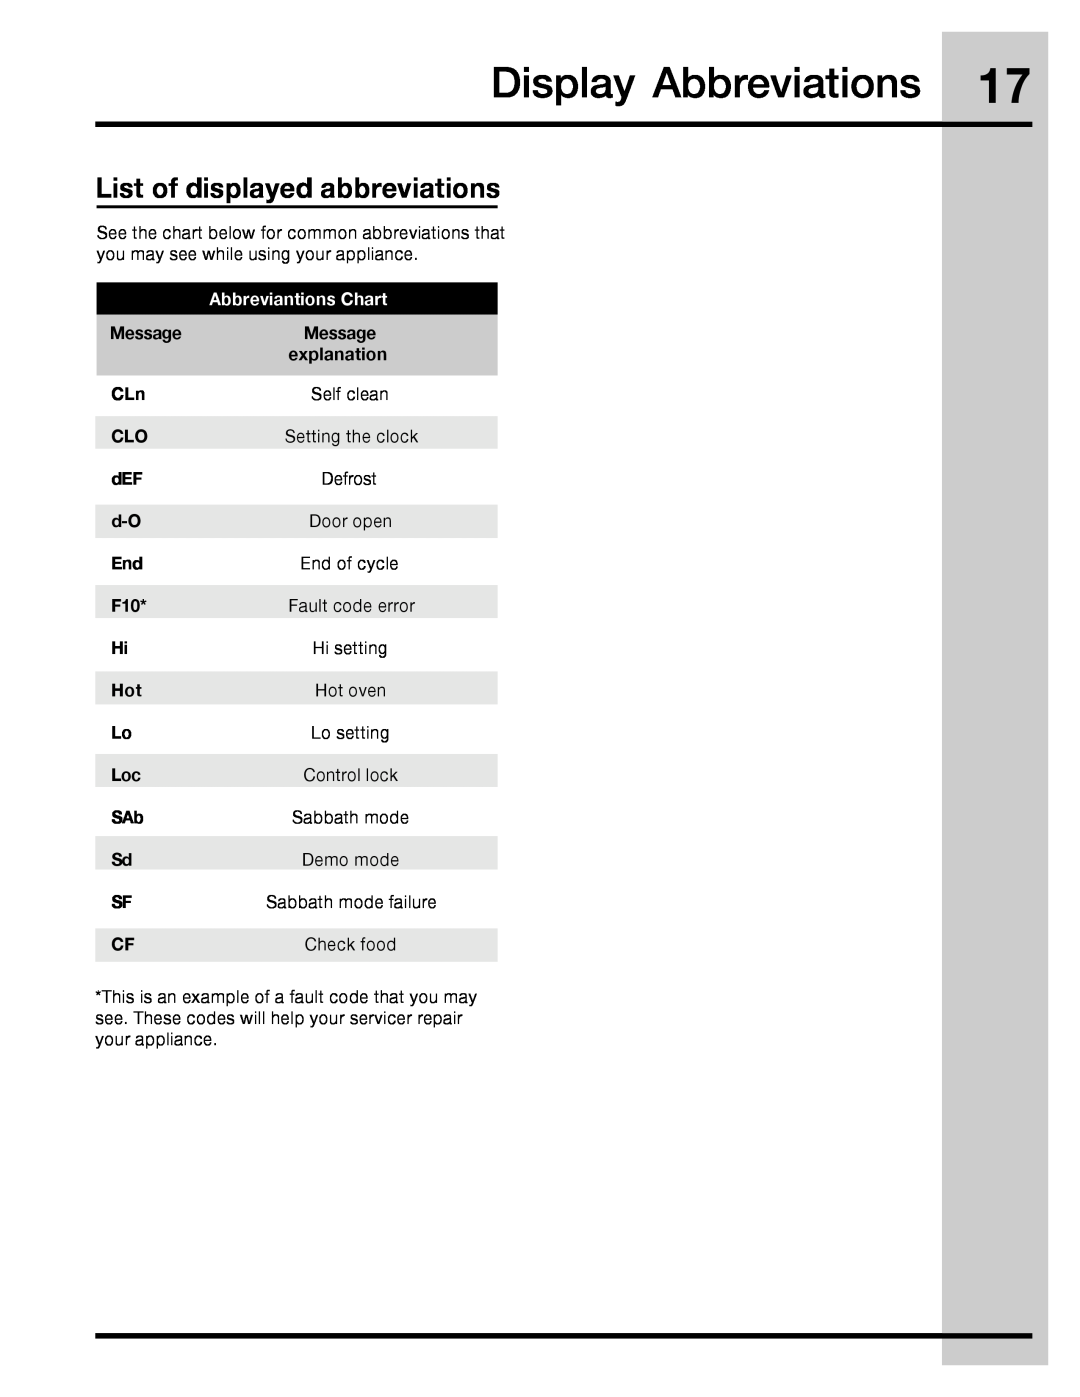 Electrolux 316471110 Display Abbreviations, List of displayed abbreviations, Abbreviantions Chart, Message, explanation 